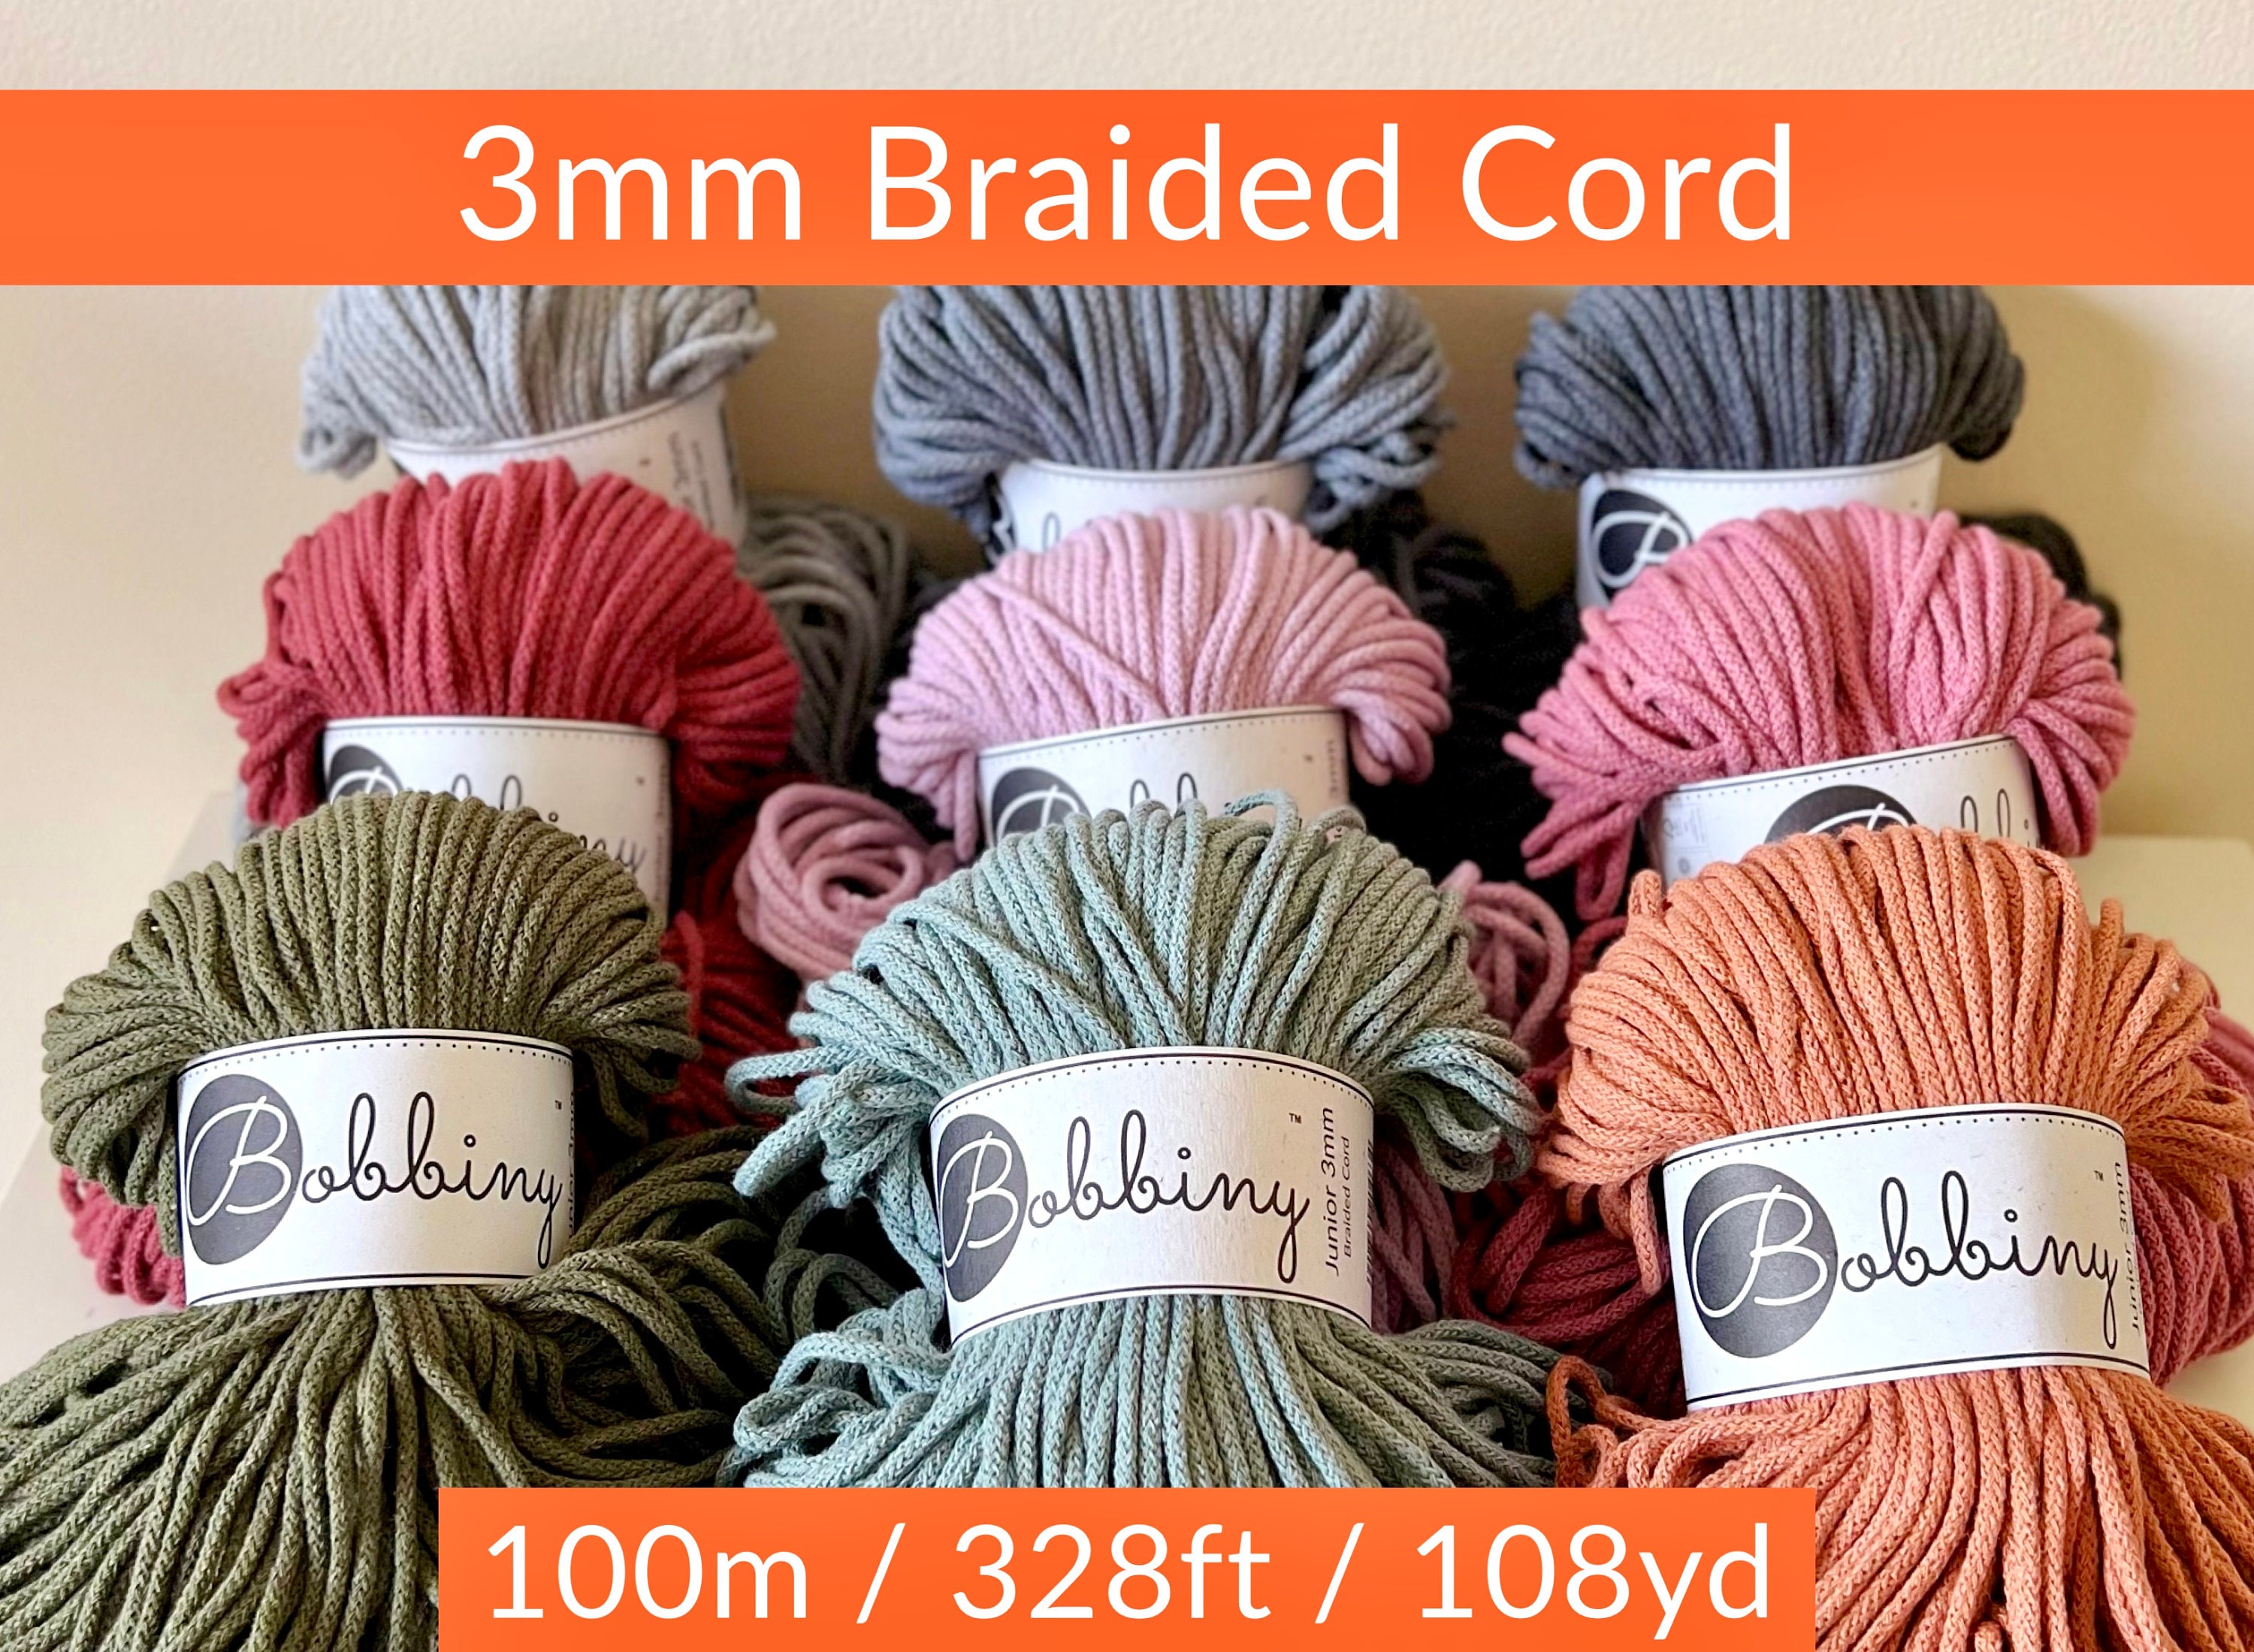 Pink 3mm Cotton Macrame Cord - 325ft Thin Rope for Crafts